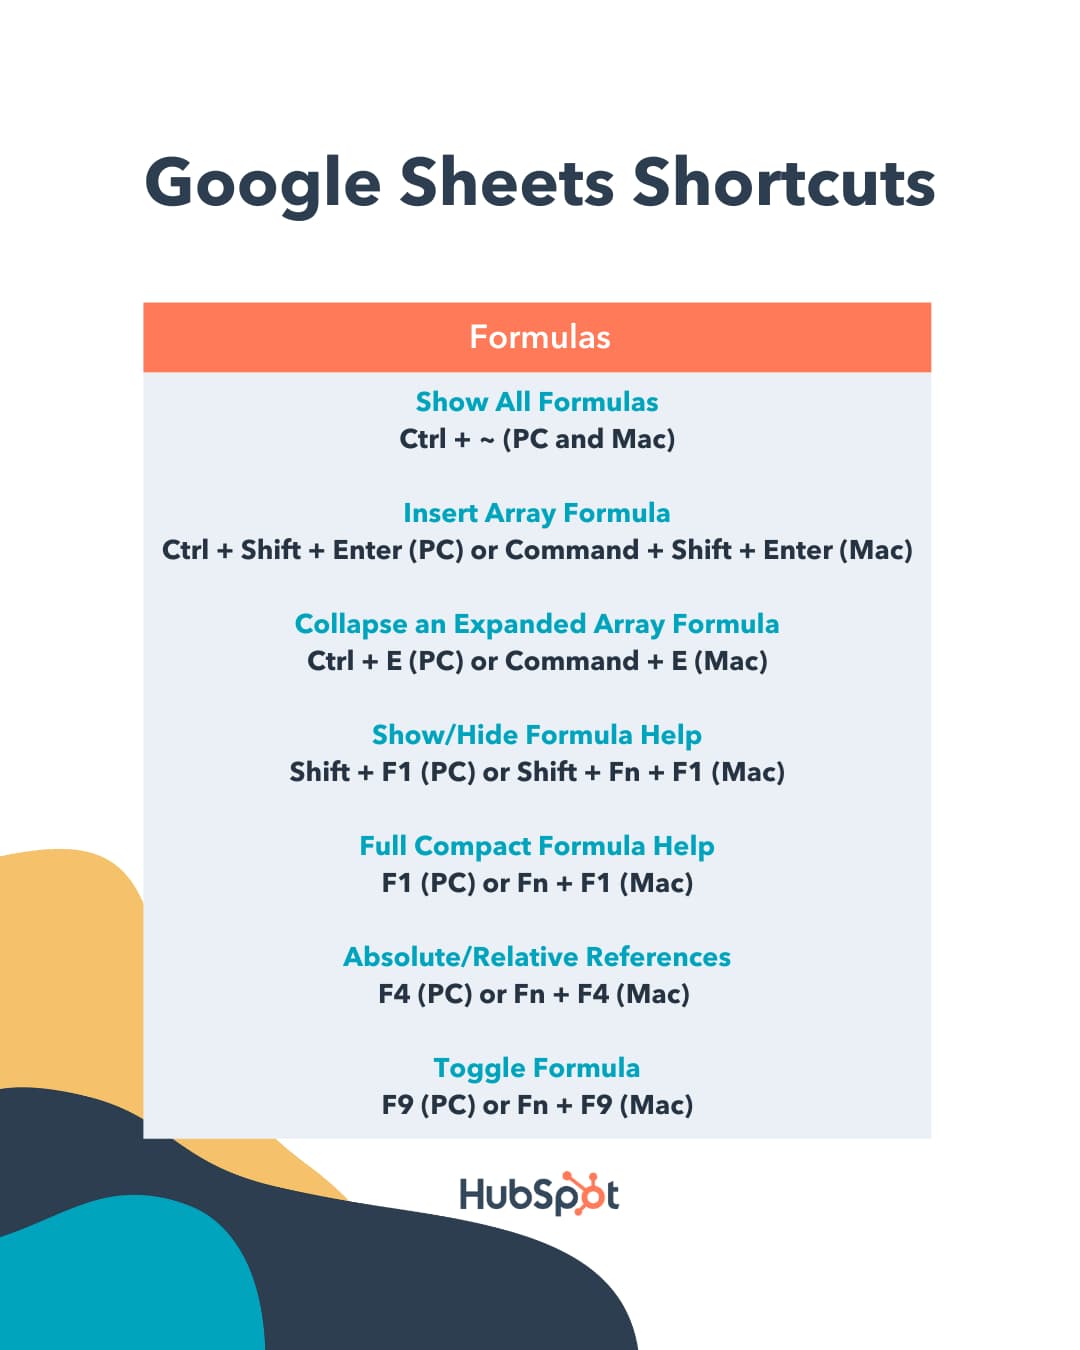 Using Google Sheets shortcuts to show all formulas, insert array formula, and more